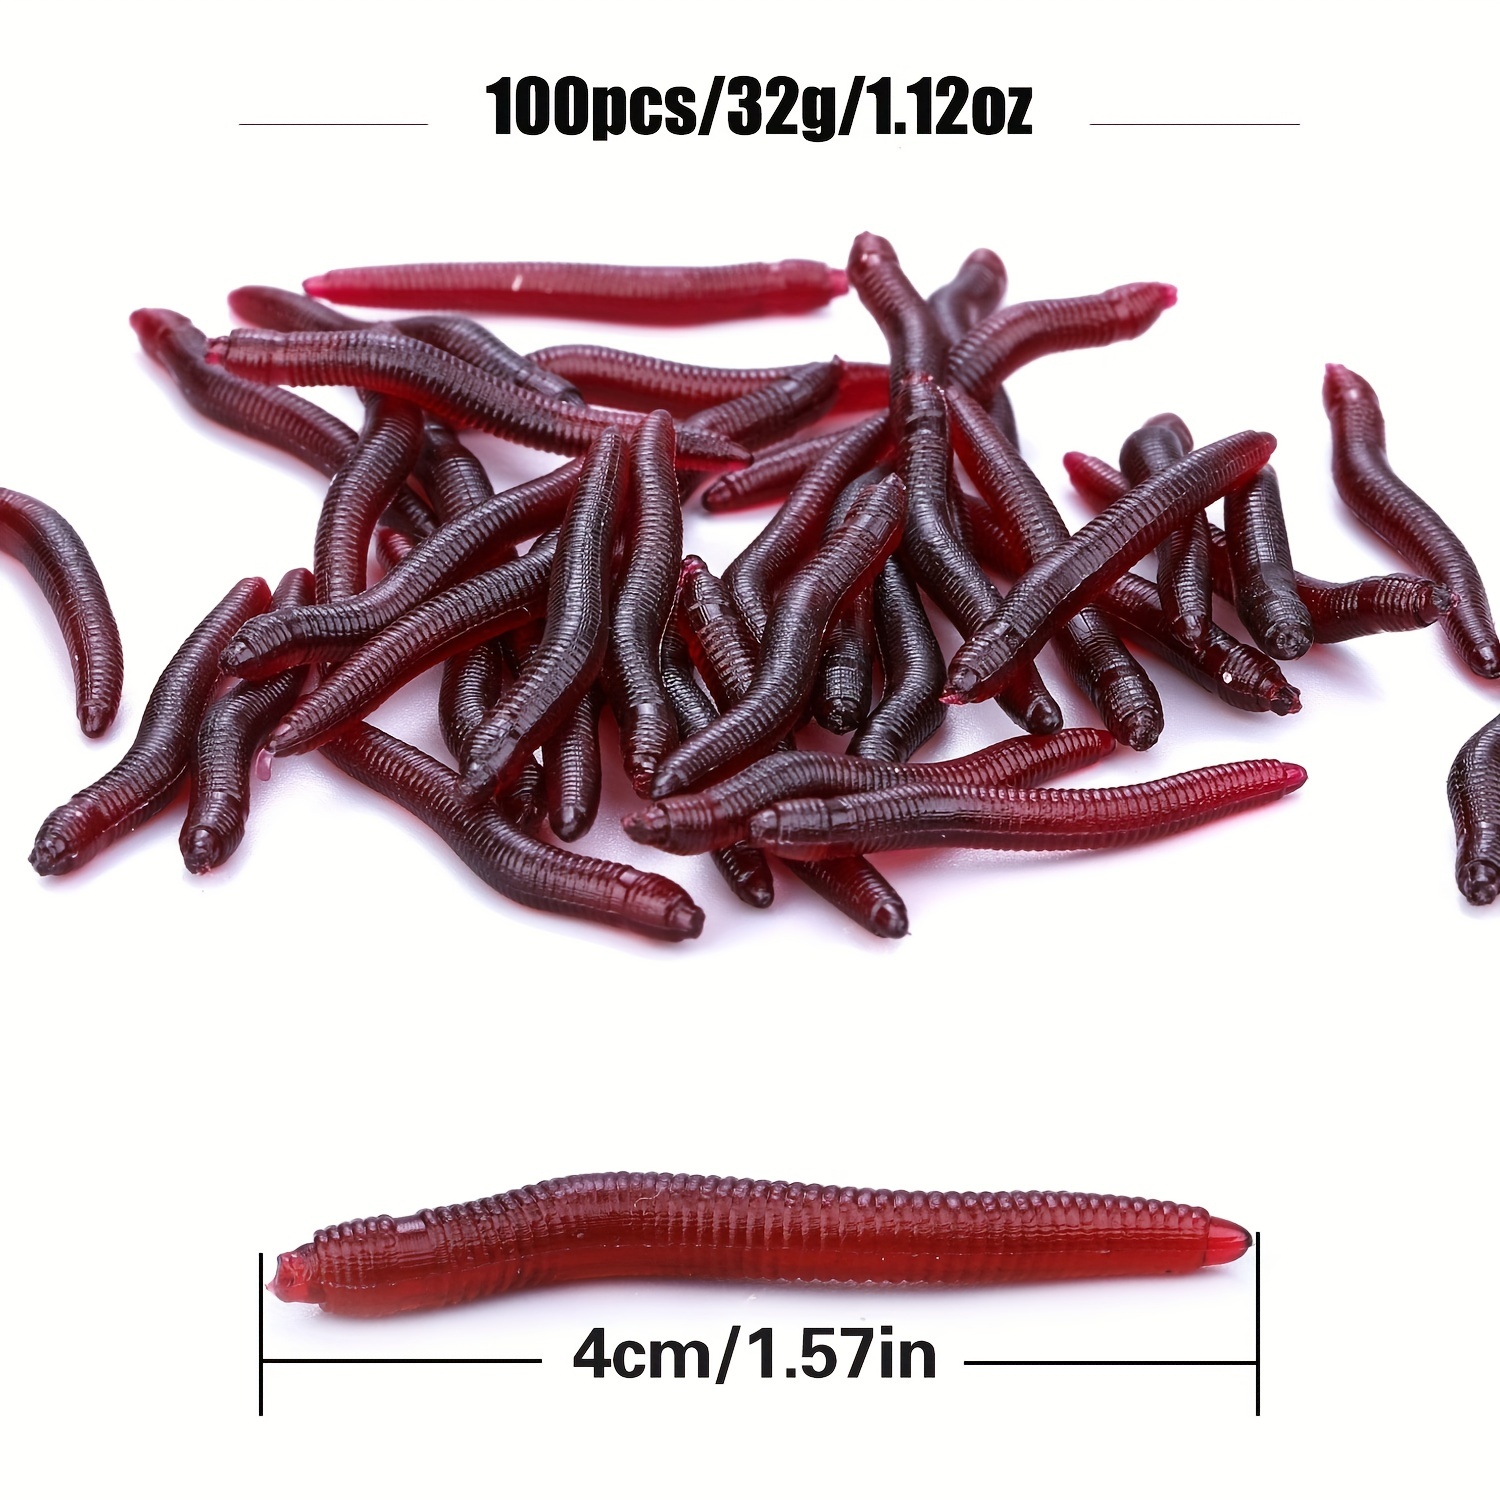 Fishing Lure Fishing Bait 4cm Soft Insects False Earthworm Sea Bait  Bloodworm Lures Artificial Baits, Soft Plastic Lures -  Canada